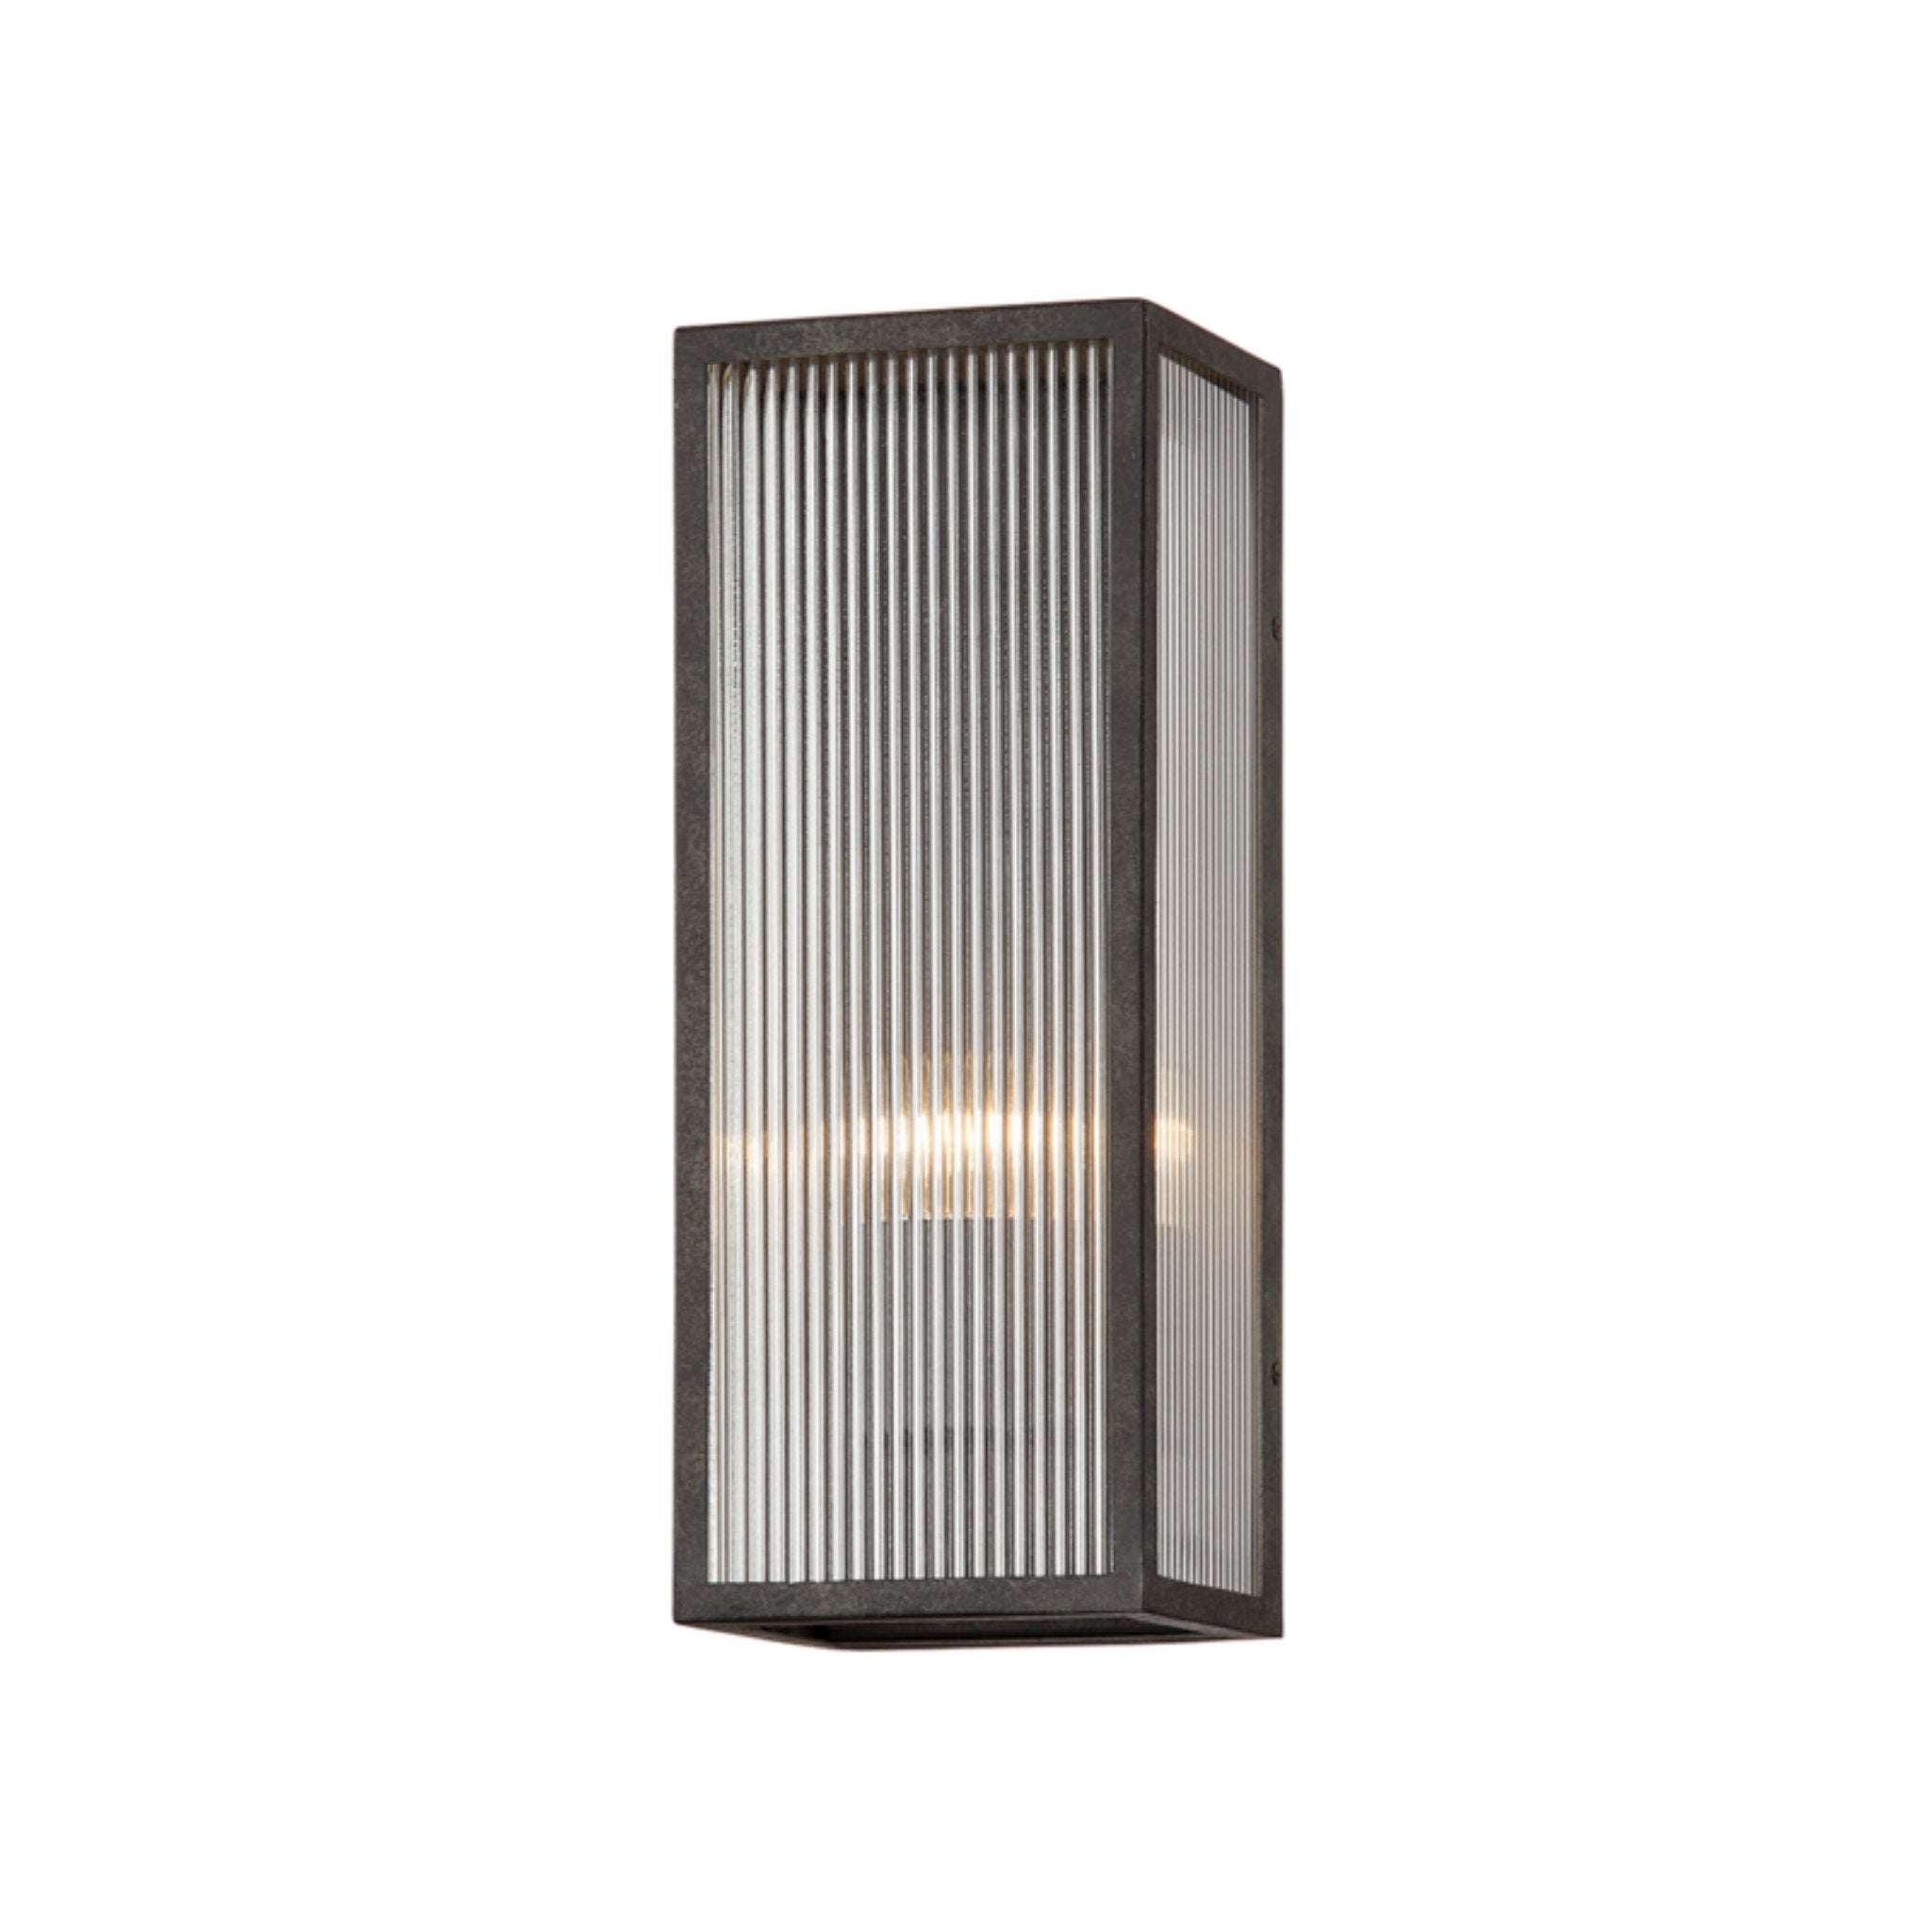 Tisoni 1 Light Wall Sconce in French Iron